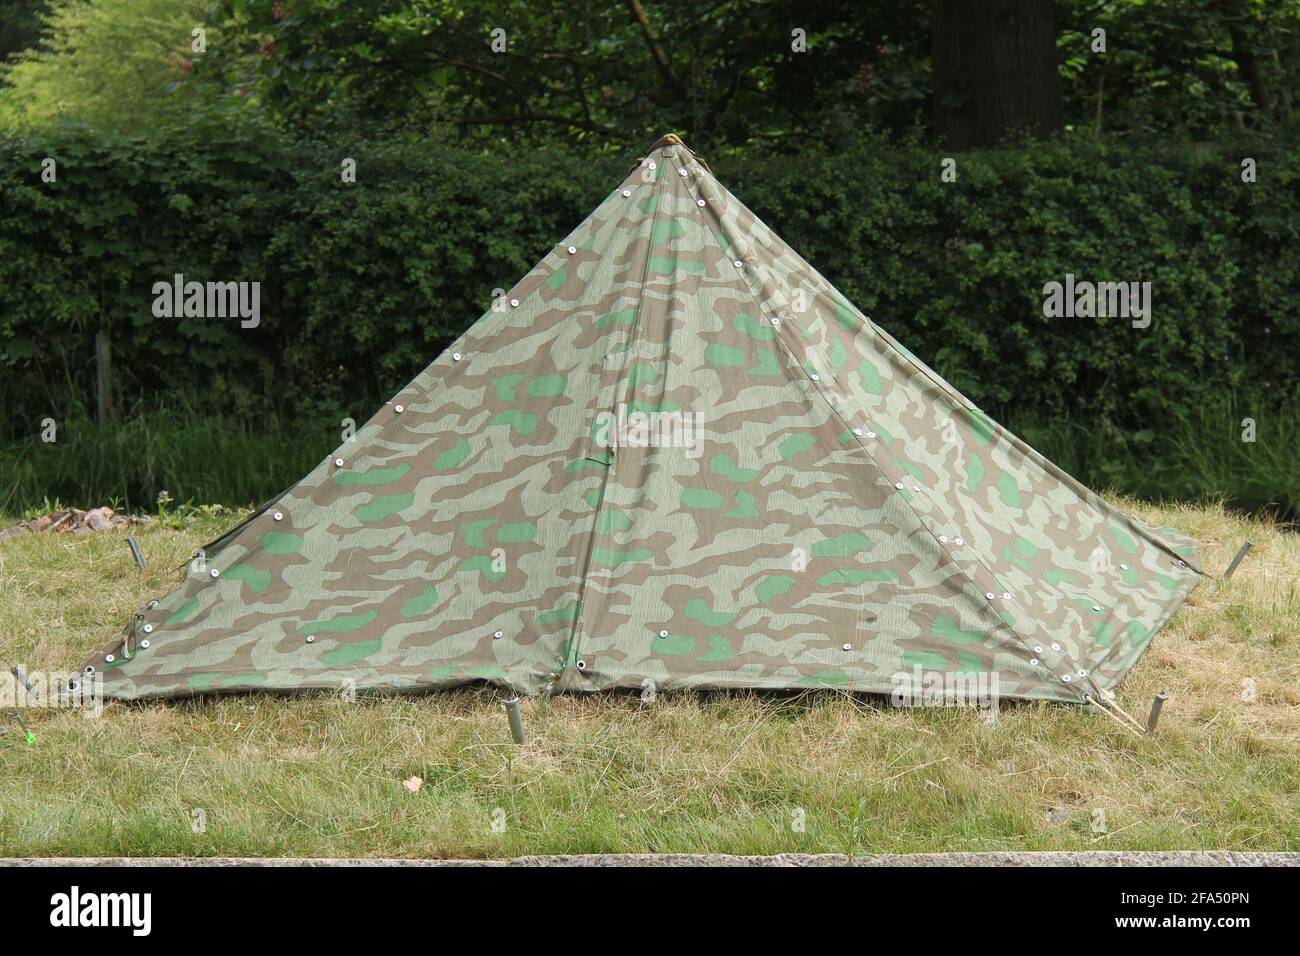 A Triangular Shaped Vintage Military Canvas Tent Stock Photo - Alamy